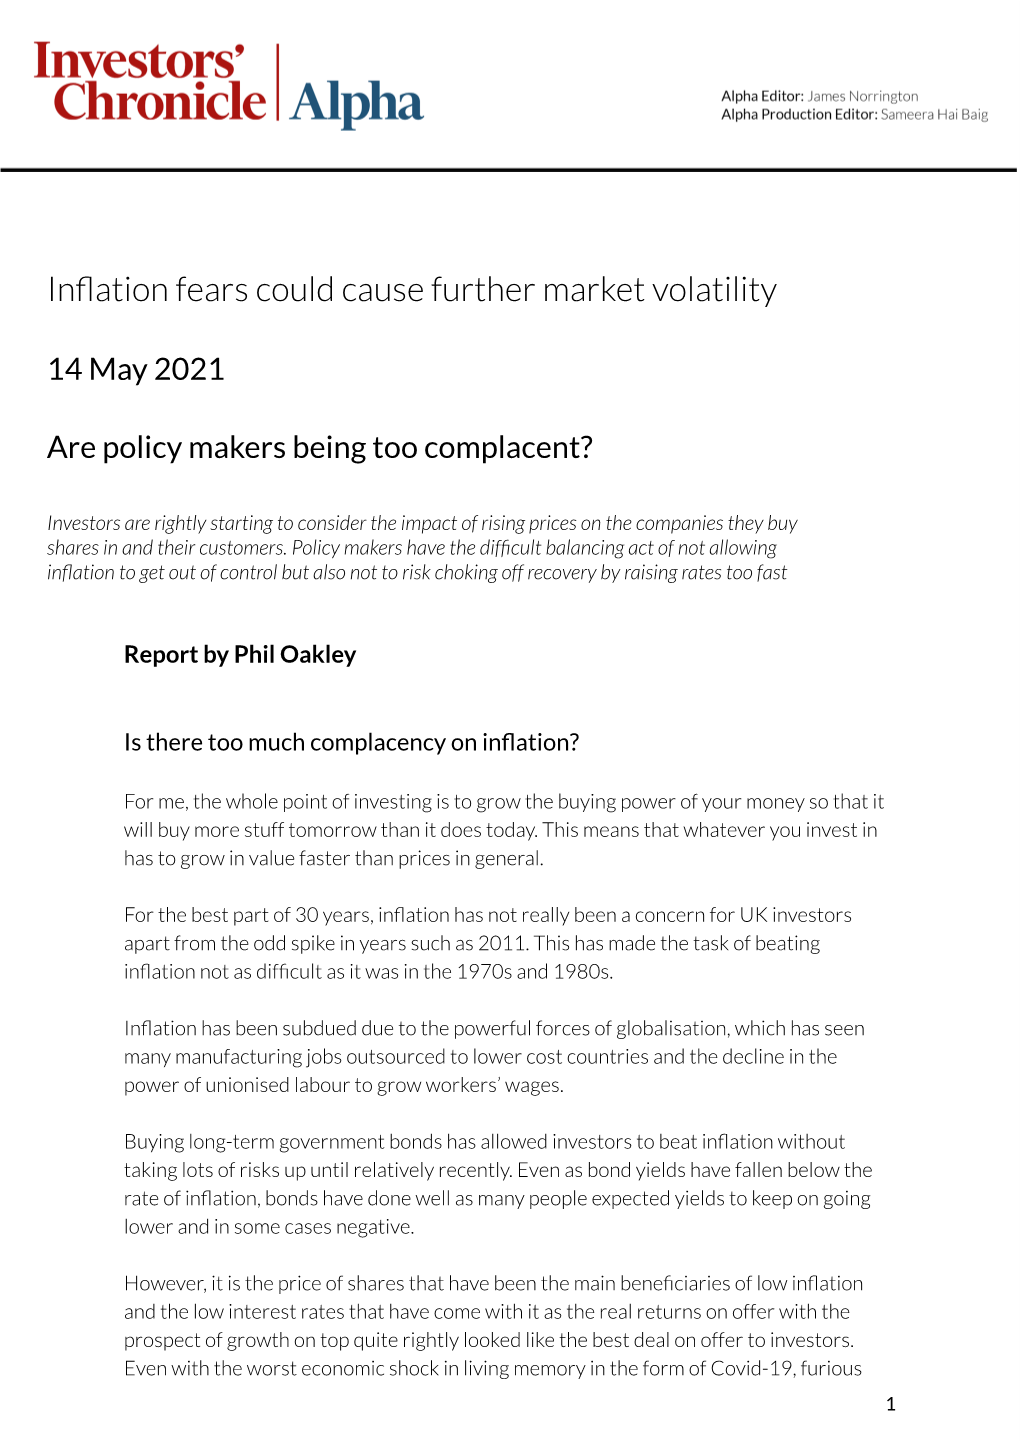 Inflation Fears Could Cause Further Market Volatility